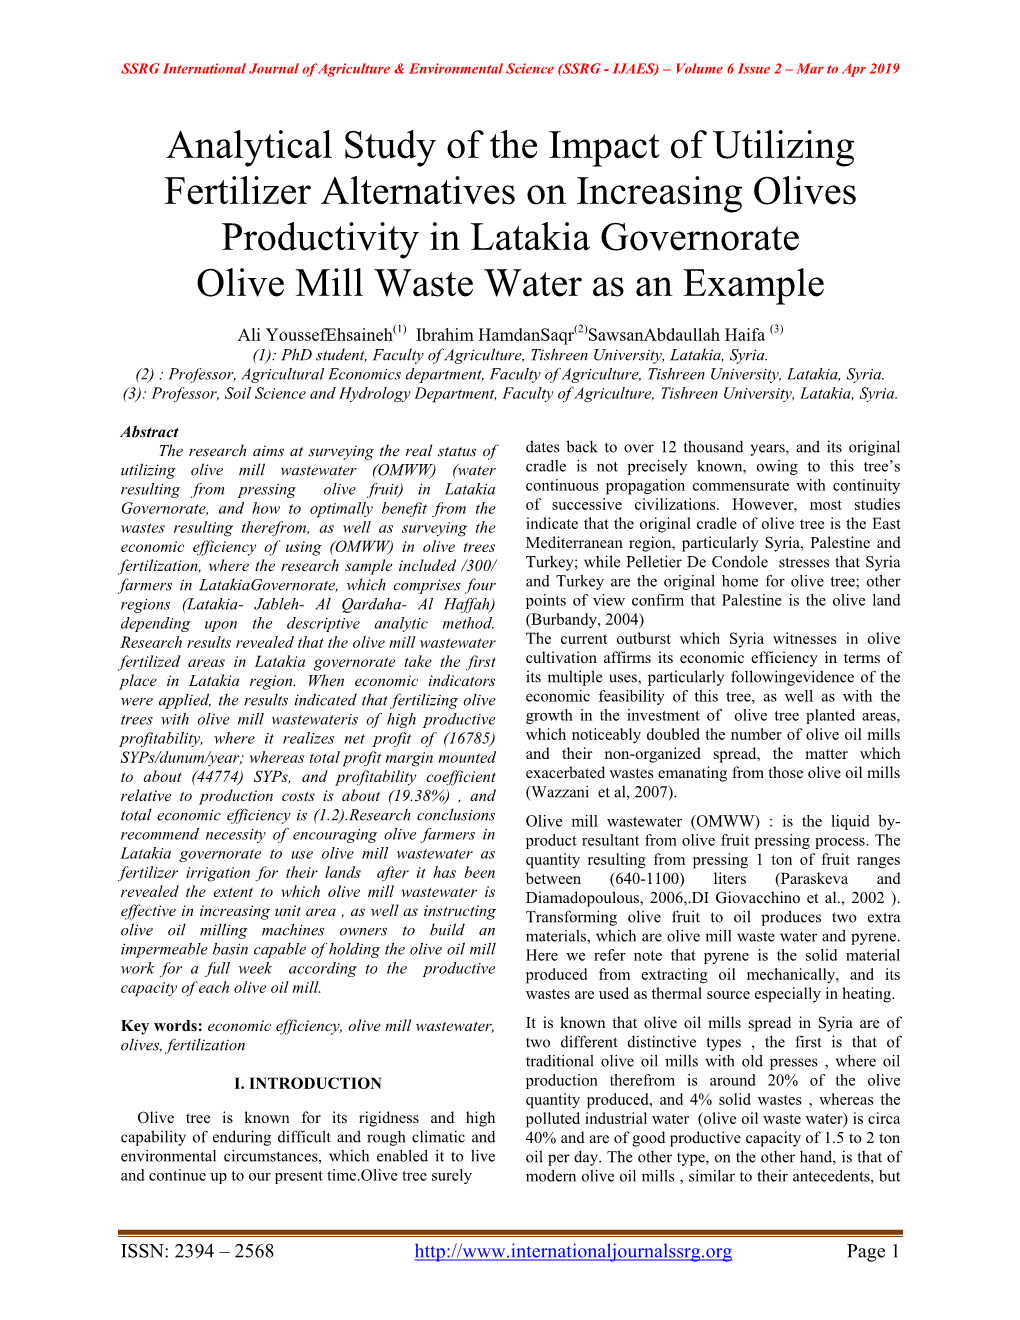 Analytical Study of the Impact of Utilizing Fertilizer Alternatives on Increasing Olives Productivity in Latakia Governorate Olive Mill Waste Water As an Example